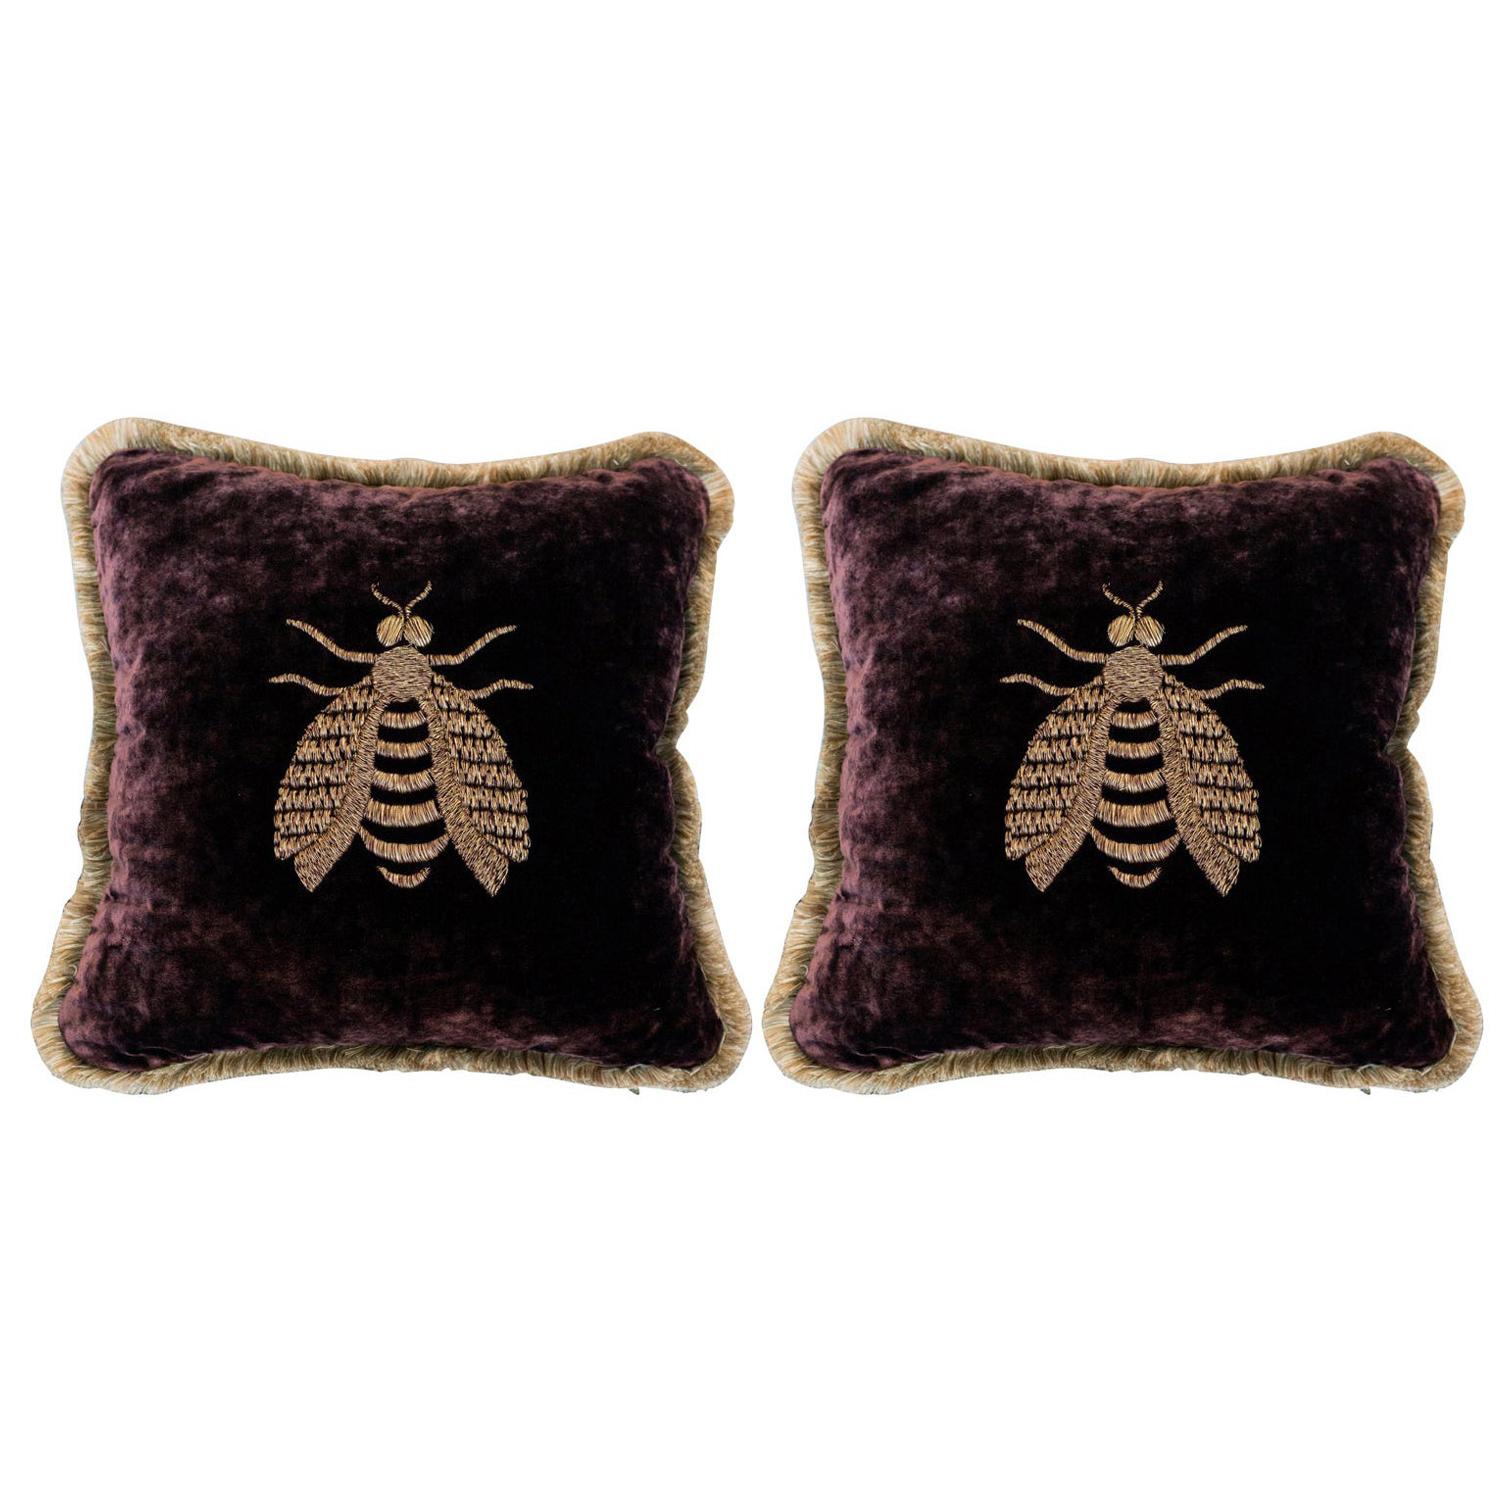 Pair of Purple Velvet Pillows with Large Metallic Embroidered Bees